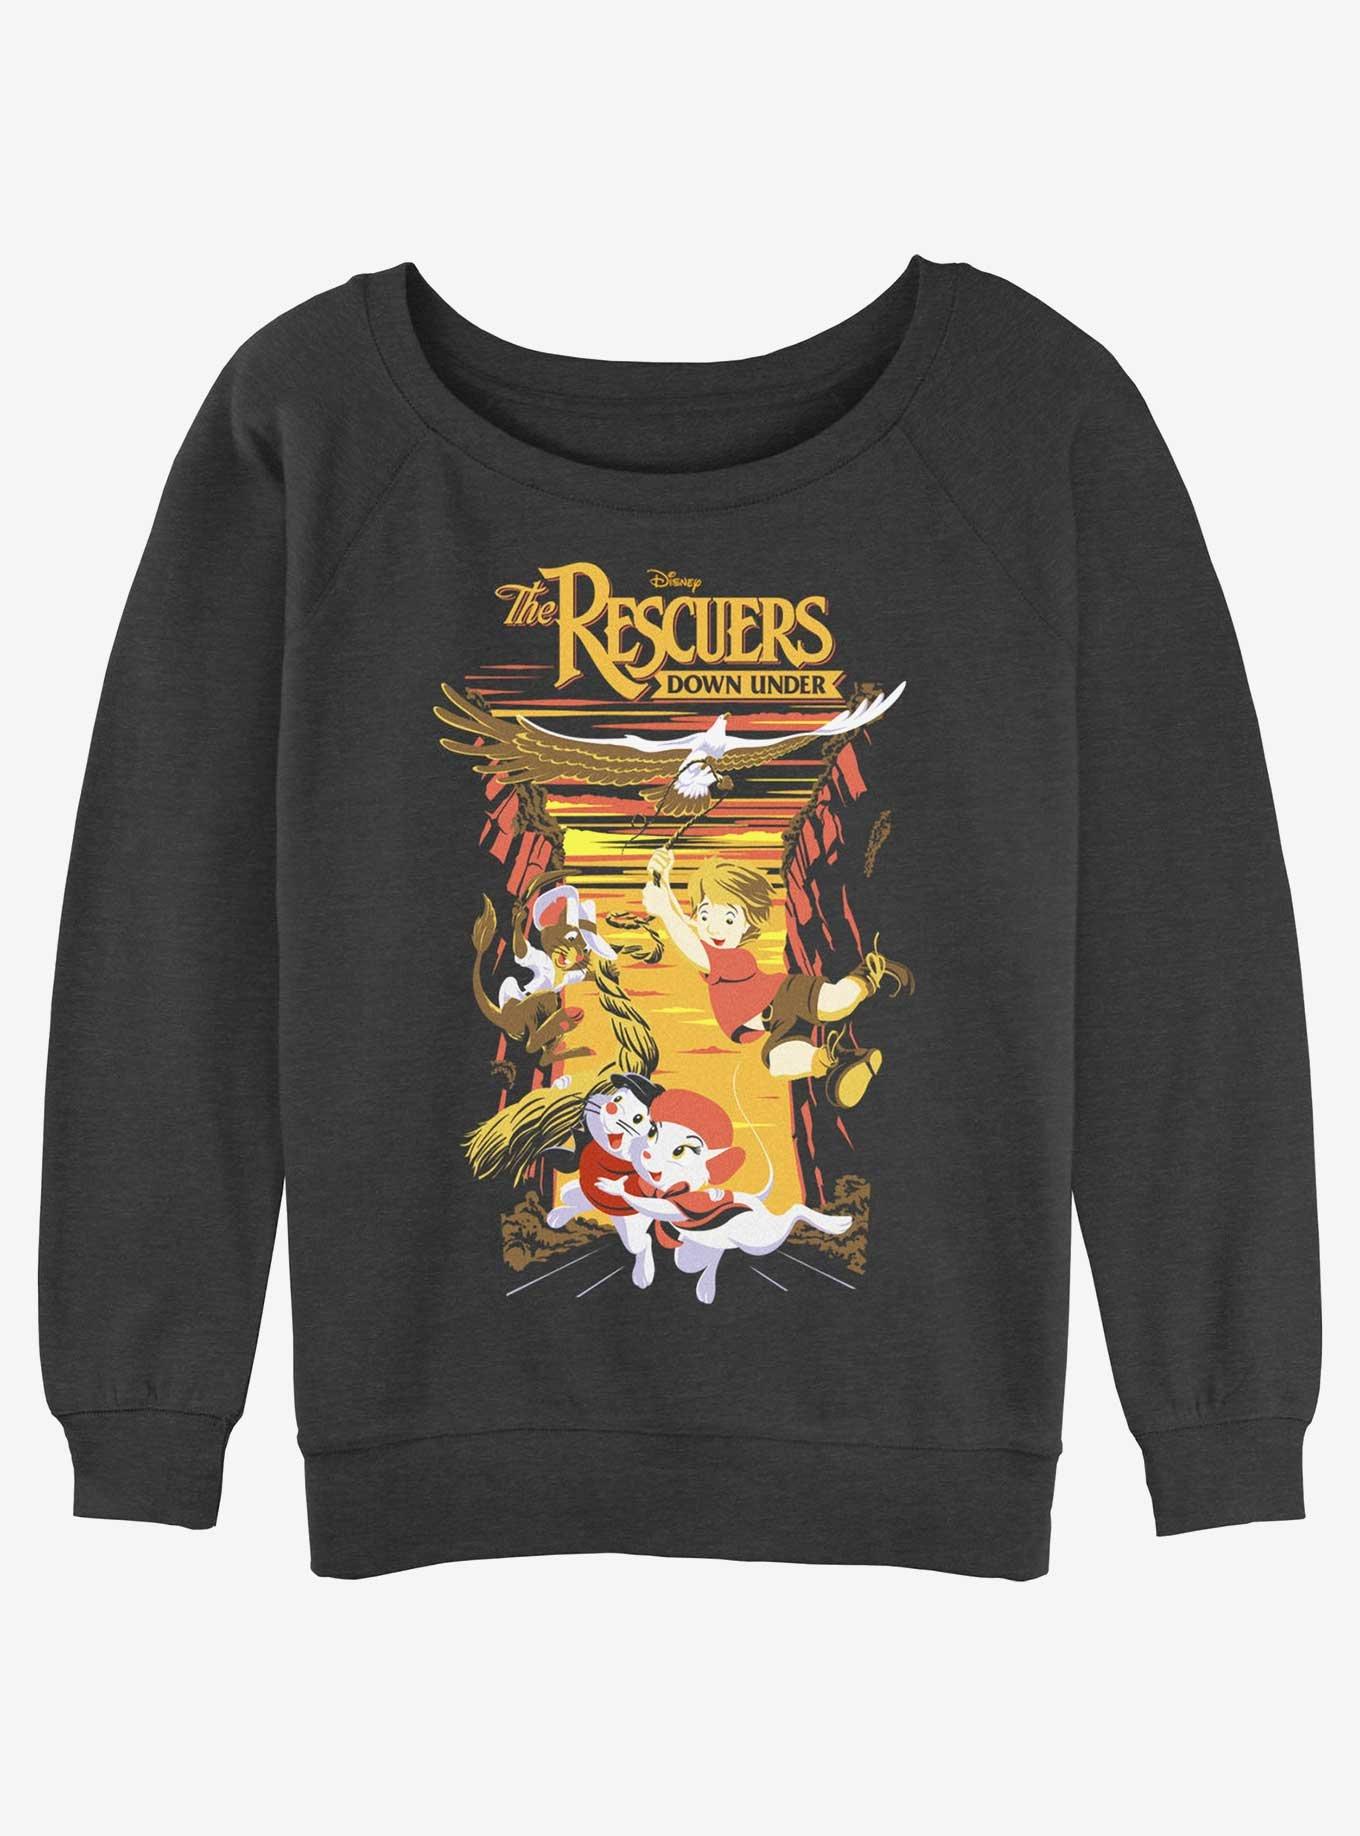 Disney The Rescuers Down Under National Park Rescue Girls Slouchy Sweatshirt, CHAR HTR, hi-res